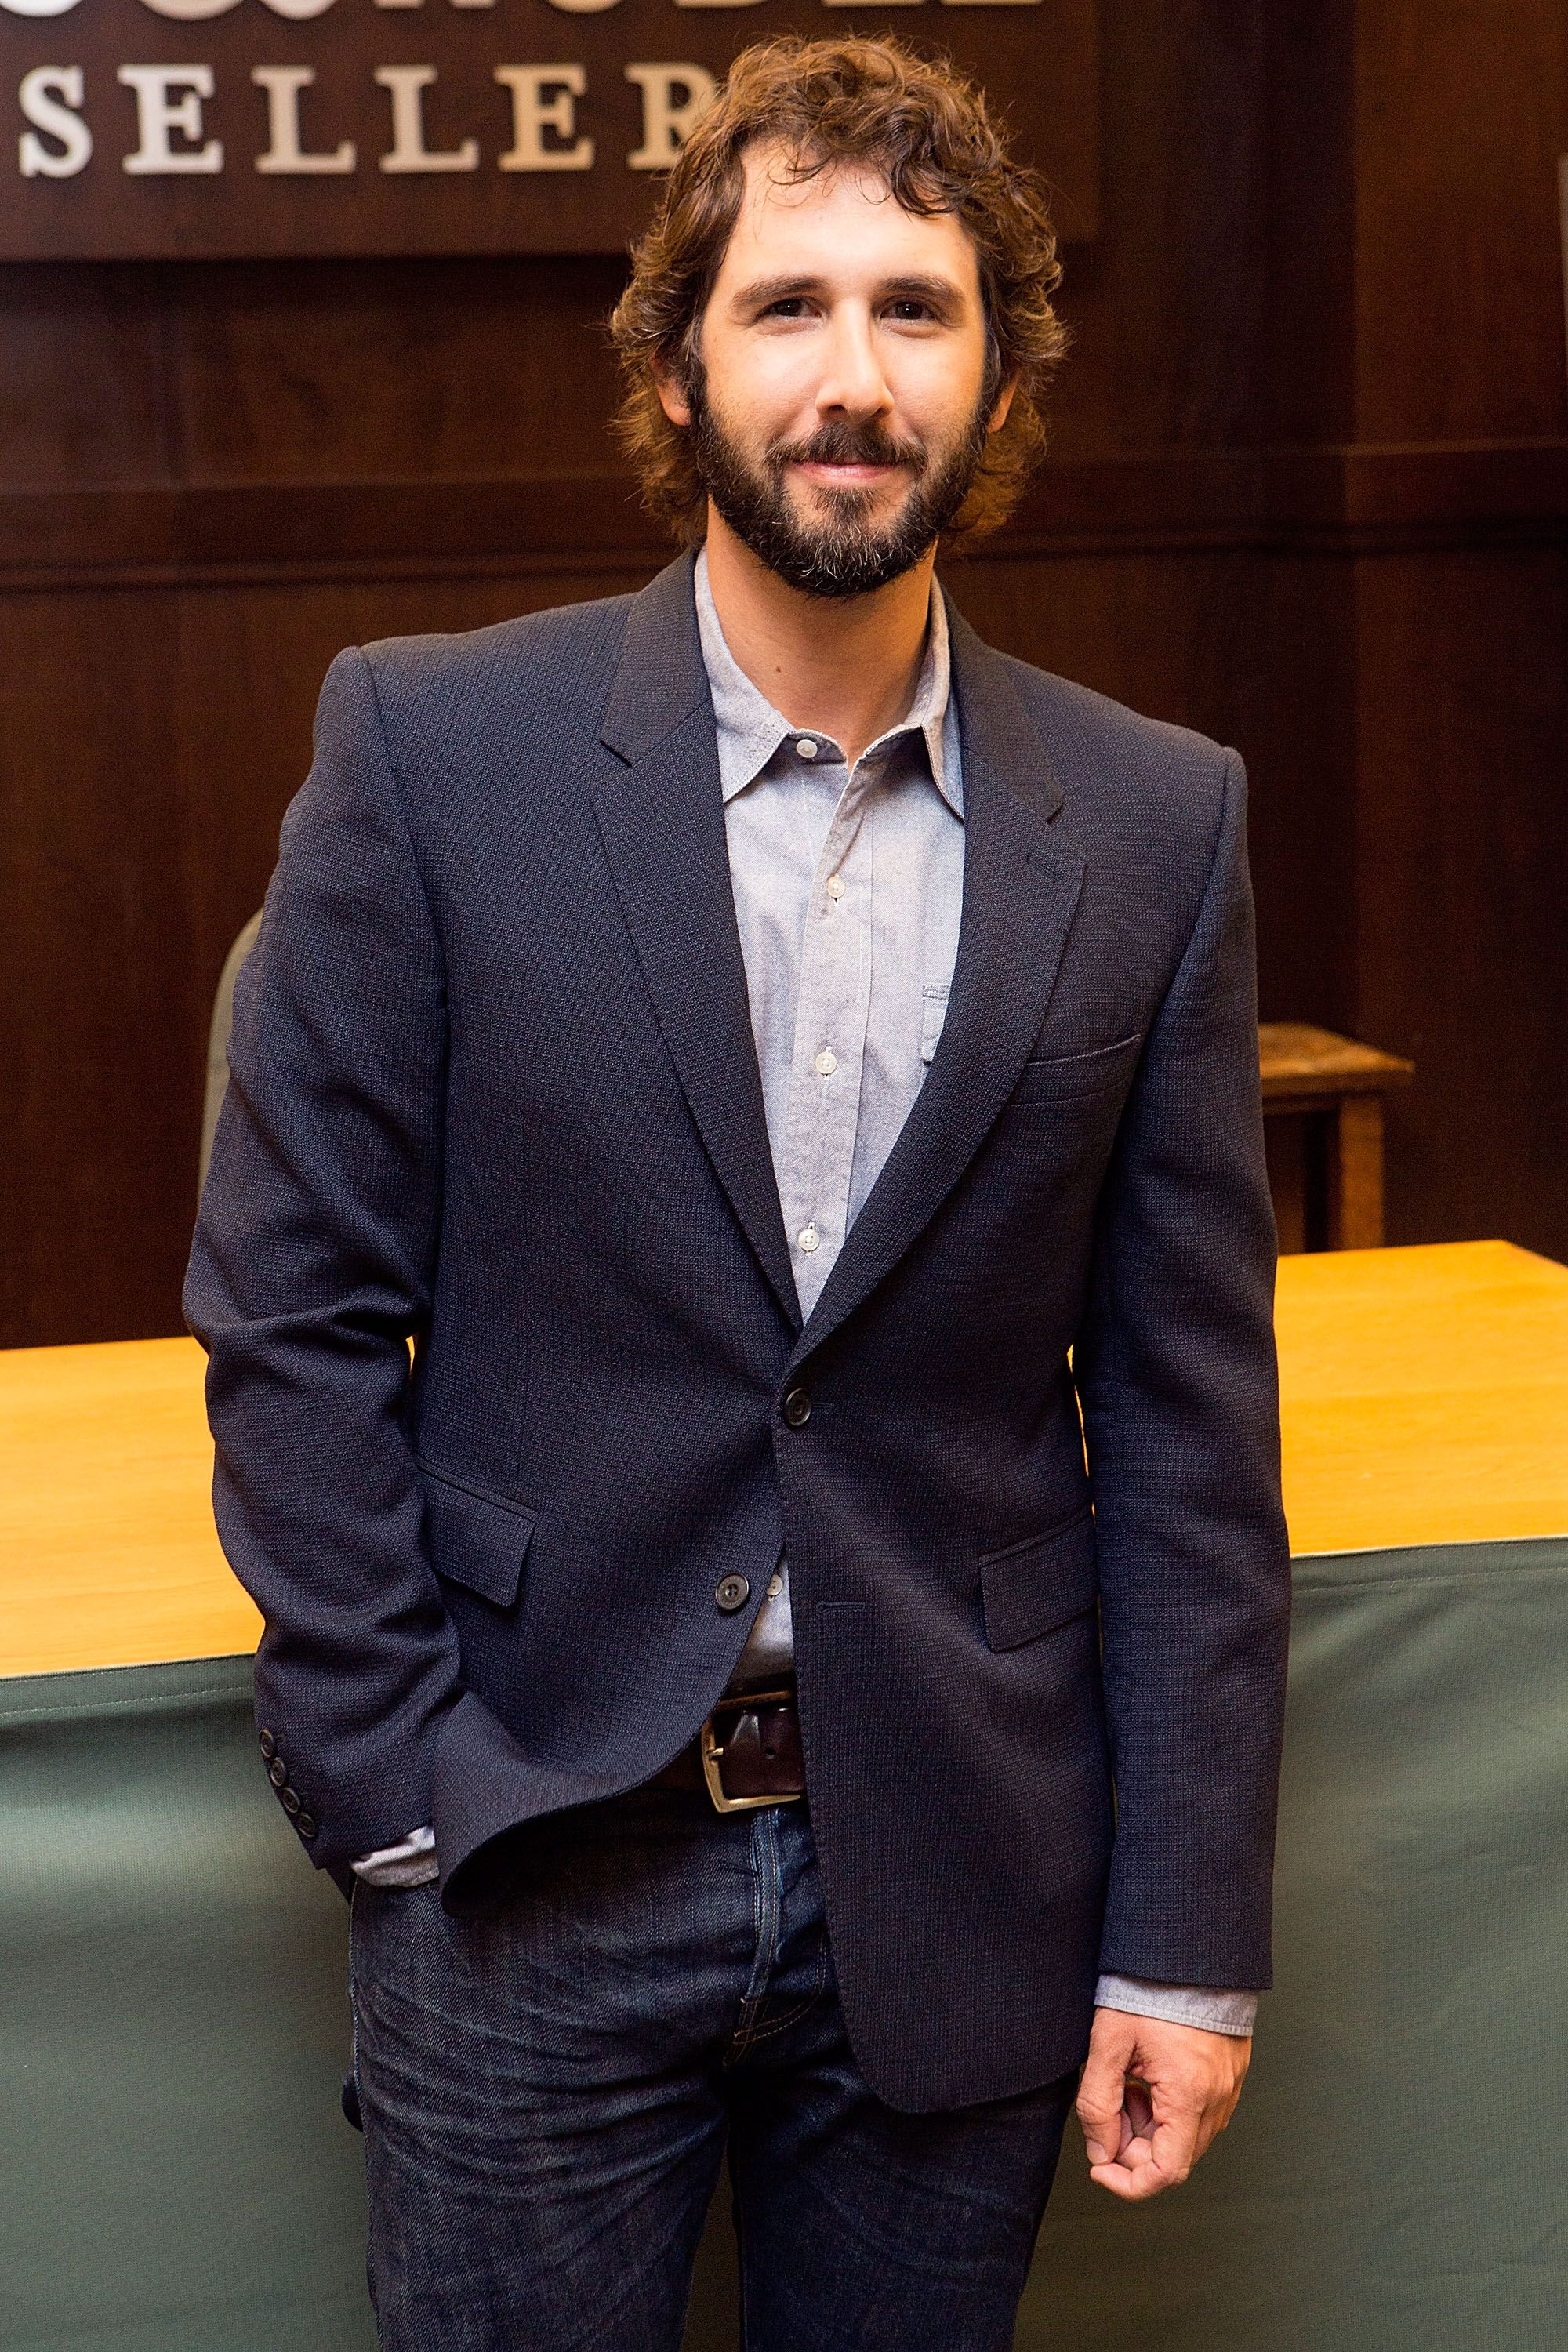 Josh Groban signs copies of his new album "Stages" at Barnes & Noble bookstore on May 8, 2015, in Los Angeles, California | Photo: Gabriel Olsen/Getty Images